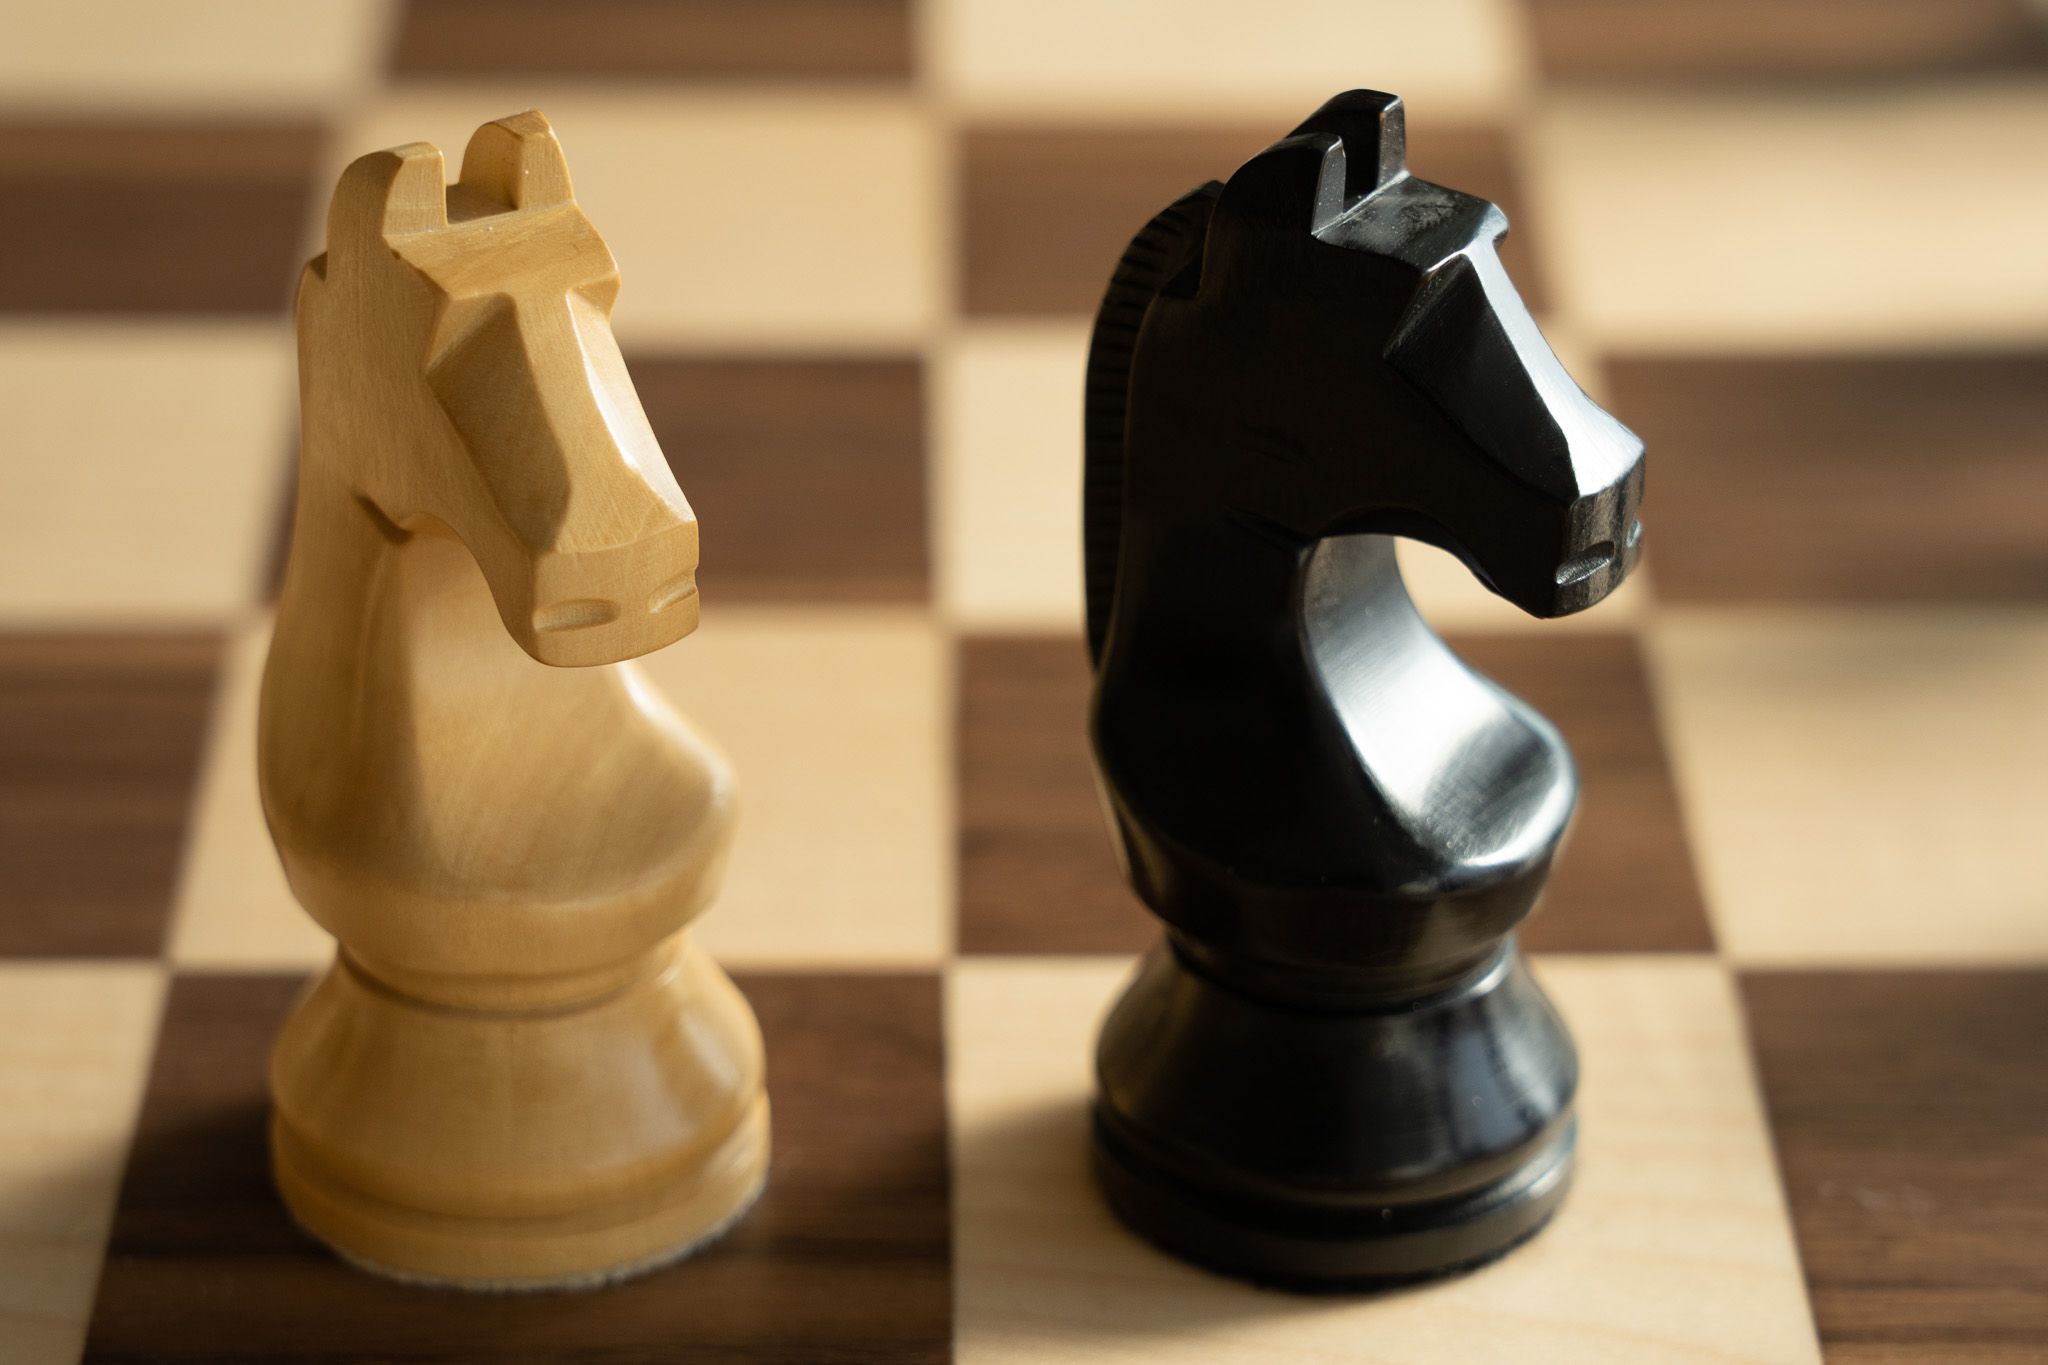 Official World Chess Championship Pieces 